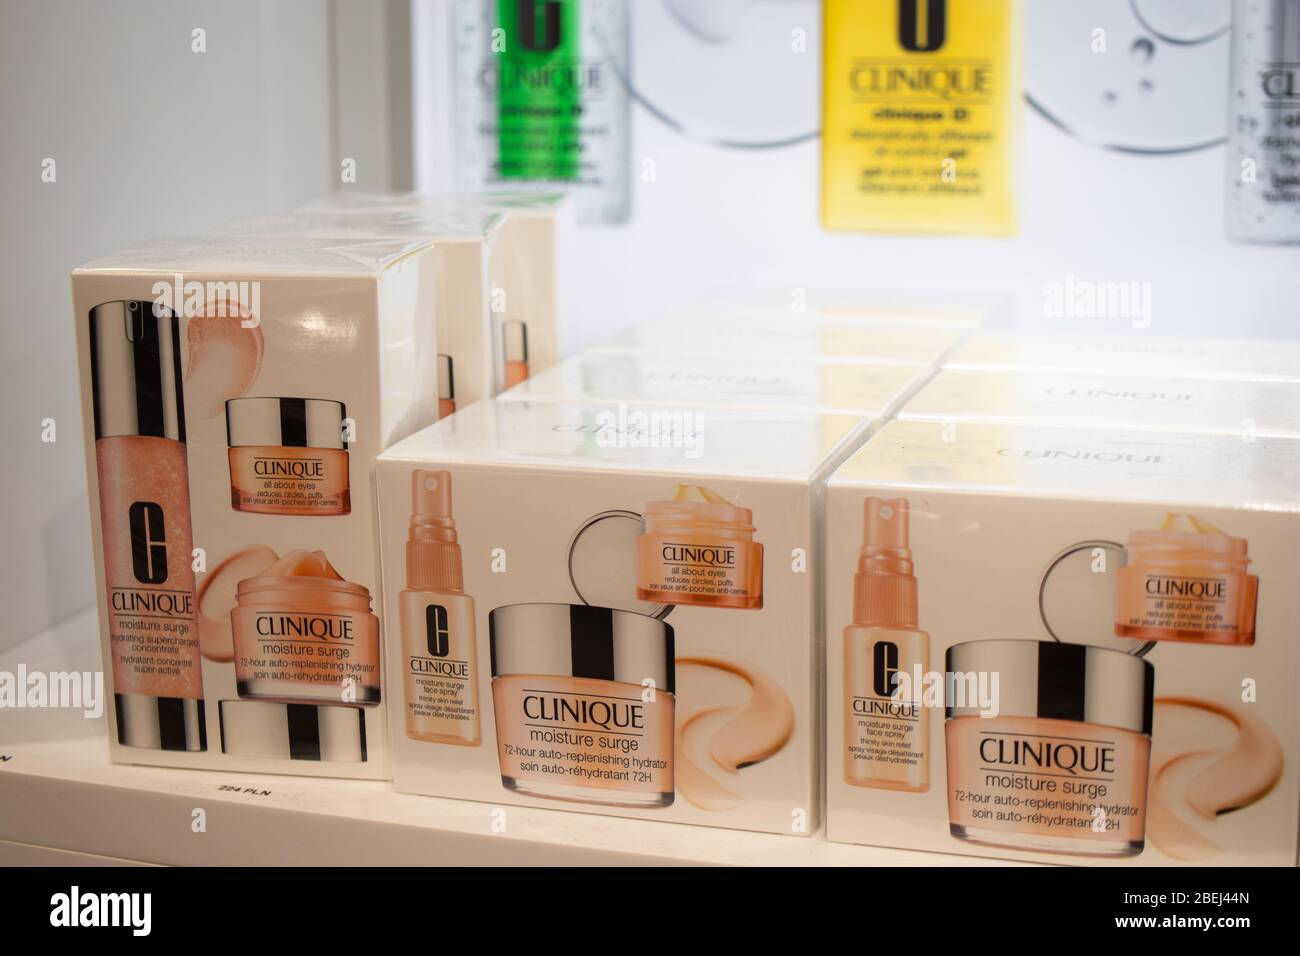 Brussels, Belgium, January 2020: Clinique cosmetics, daily repair serum on  shop display, Clinique provides medical anti-ageing cosmetics for consumers  Stock Photo - Alamy